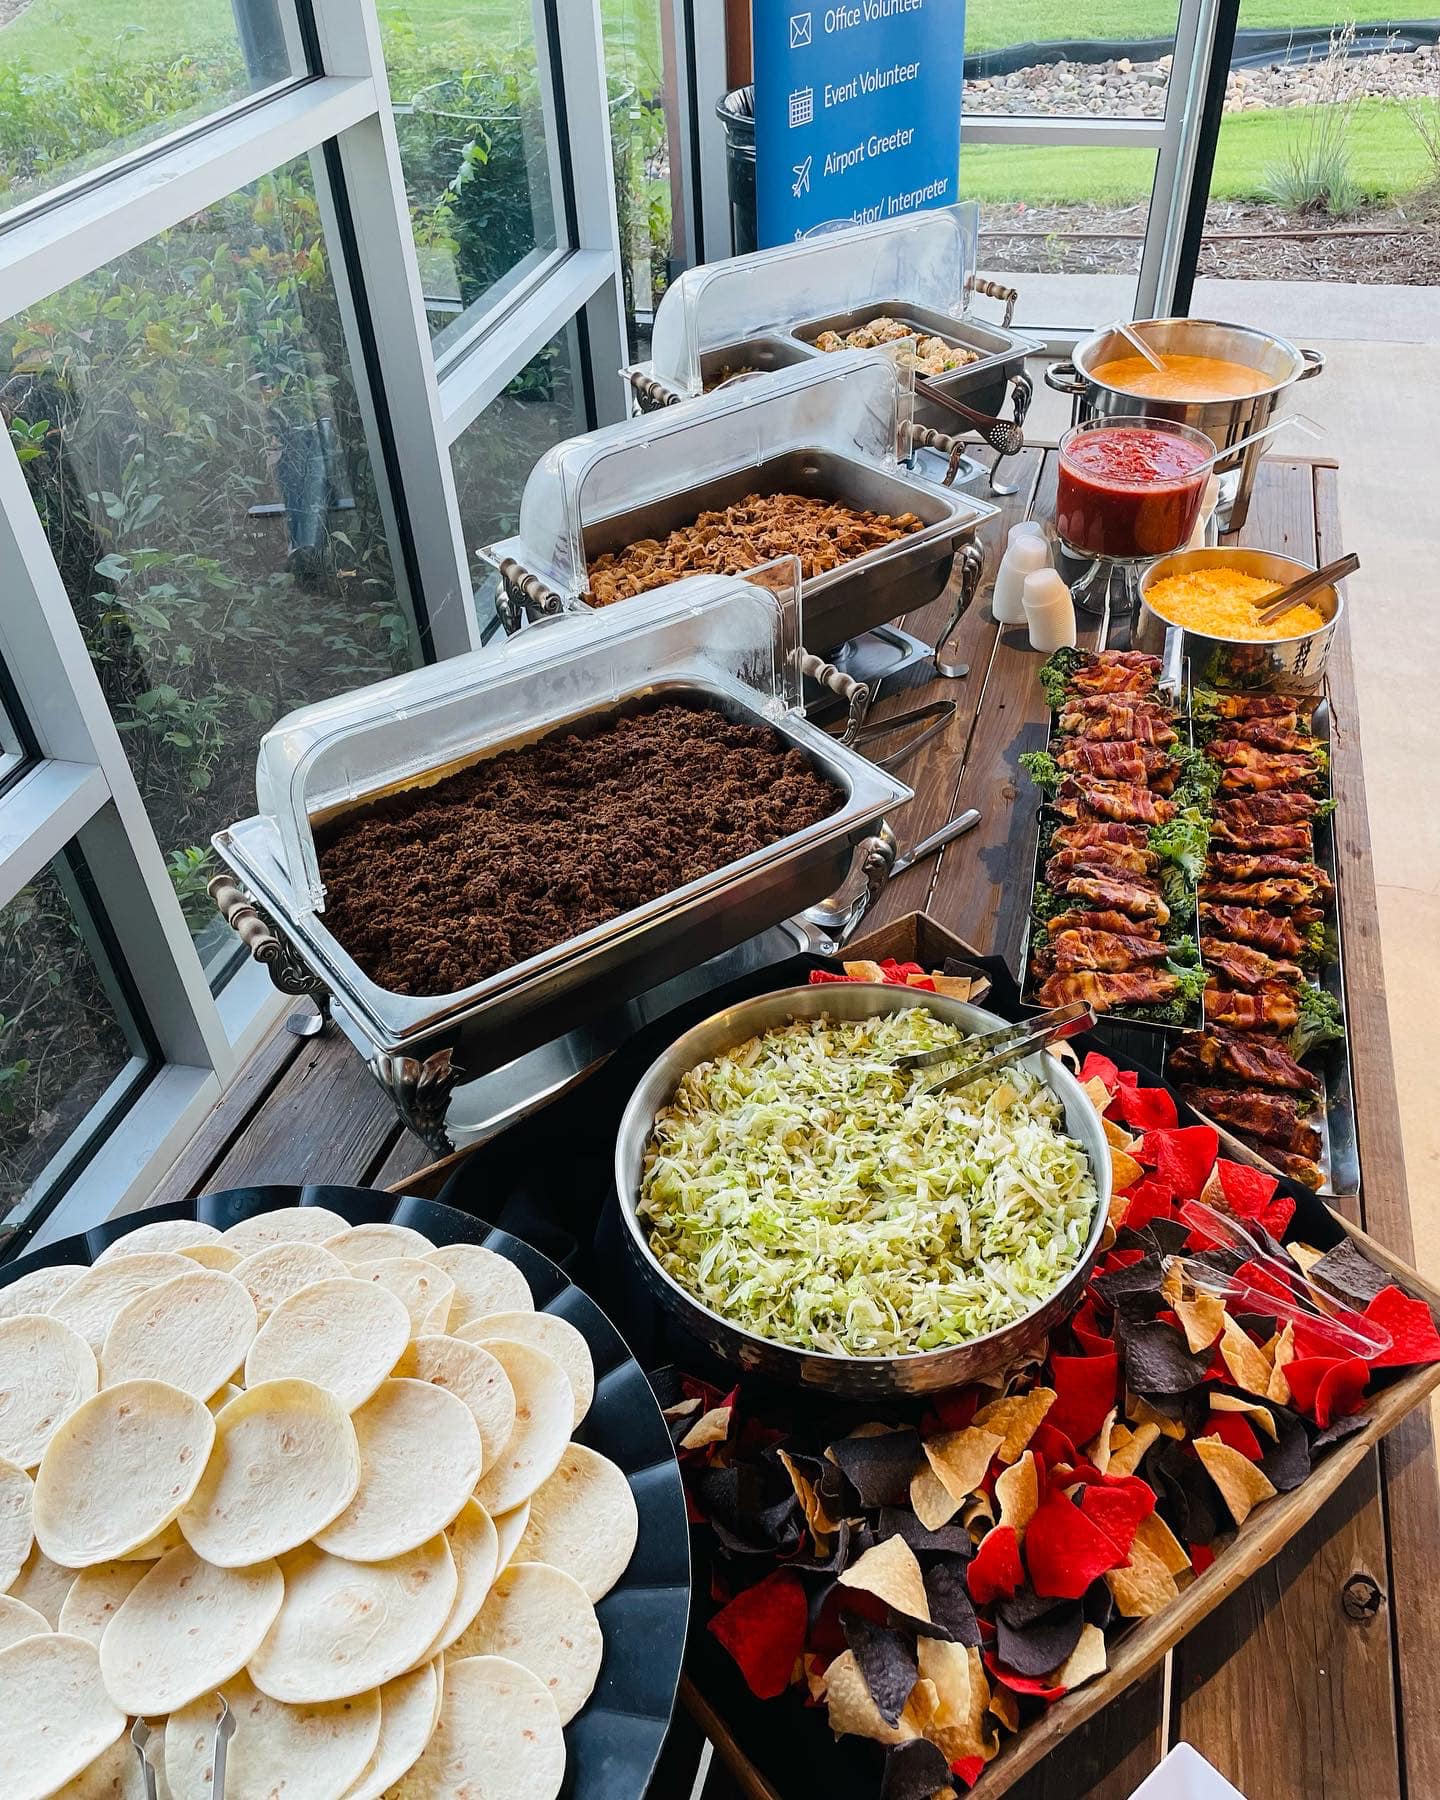 catering image